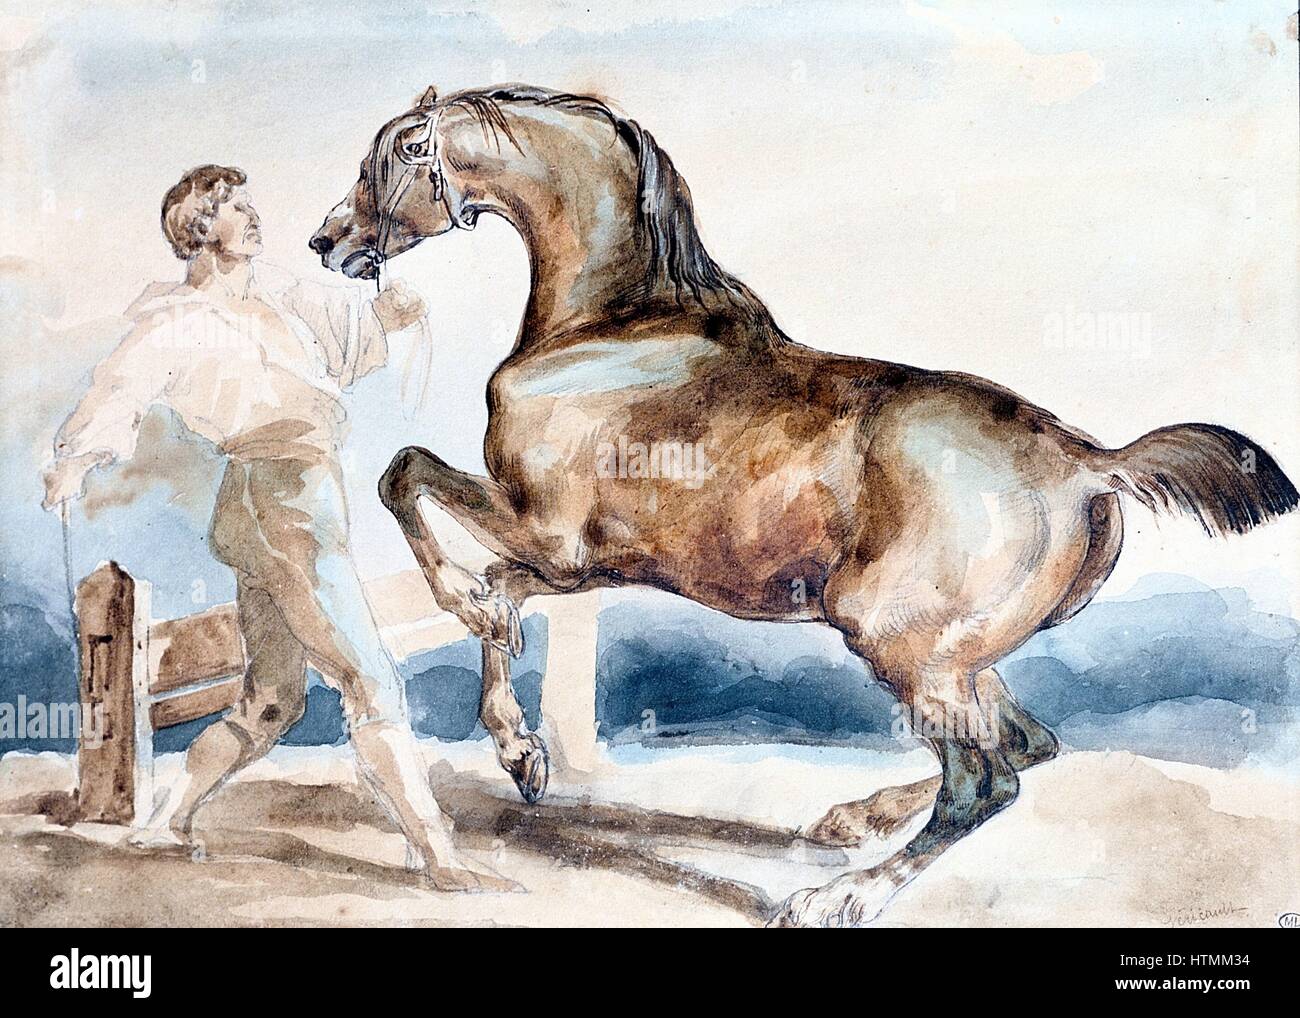 Le Dressage' Theodore Gericault (1791-1824) French painter. Man training (breaking) a horse with docked tail. Watercolour. Department of Drawings, Louvre, Paris. Stock Photo